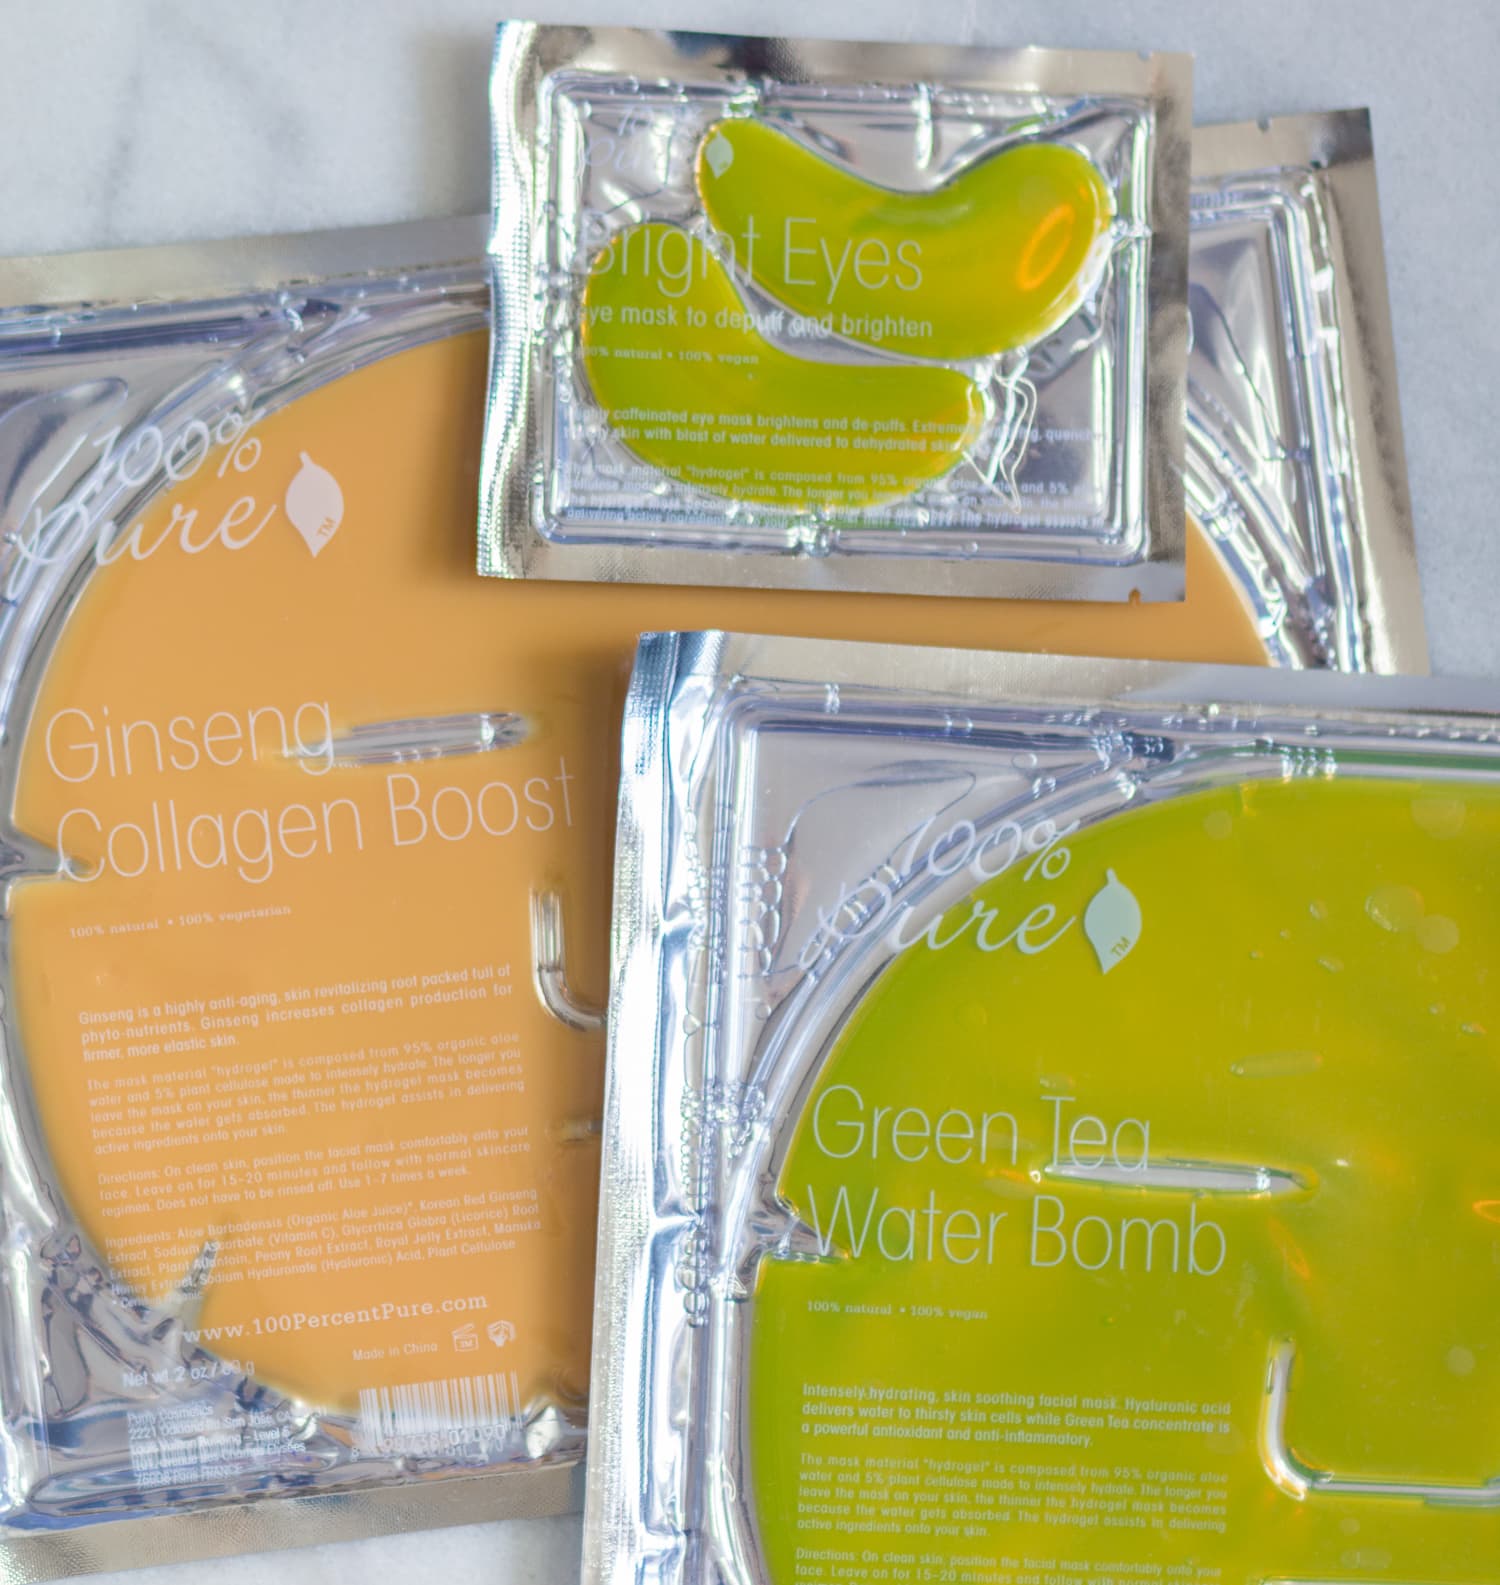 100% Pure Ginseng Collagen Mask, Green Tea Water Bomb, and Bright Eyes Mask review | Click through to see the full post by beauty blogger Ashley Brooke Nicholas